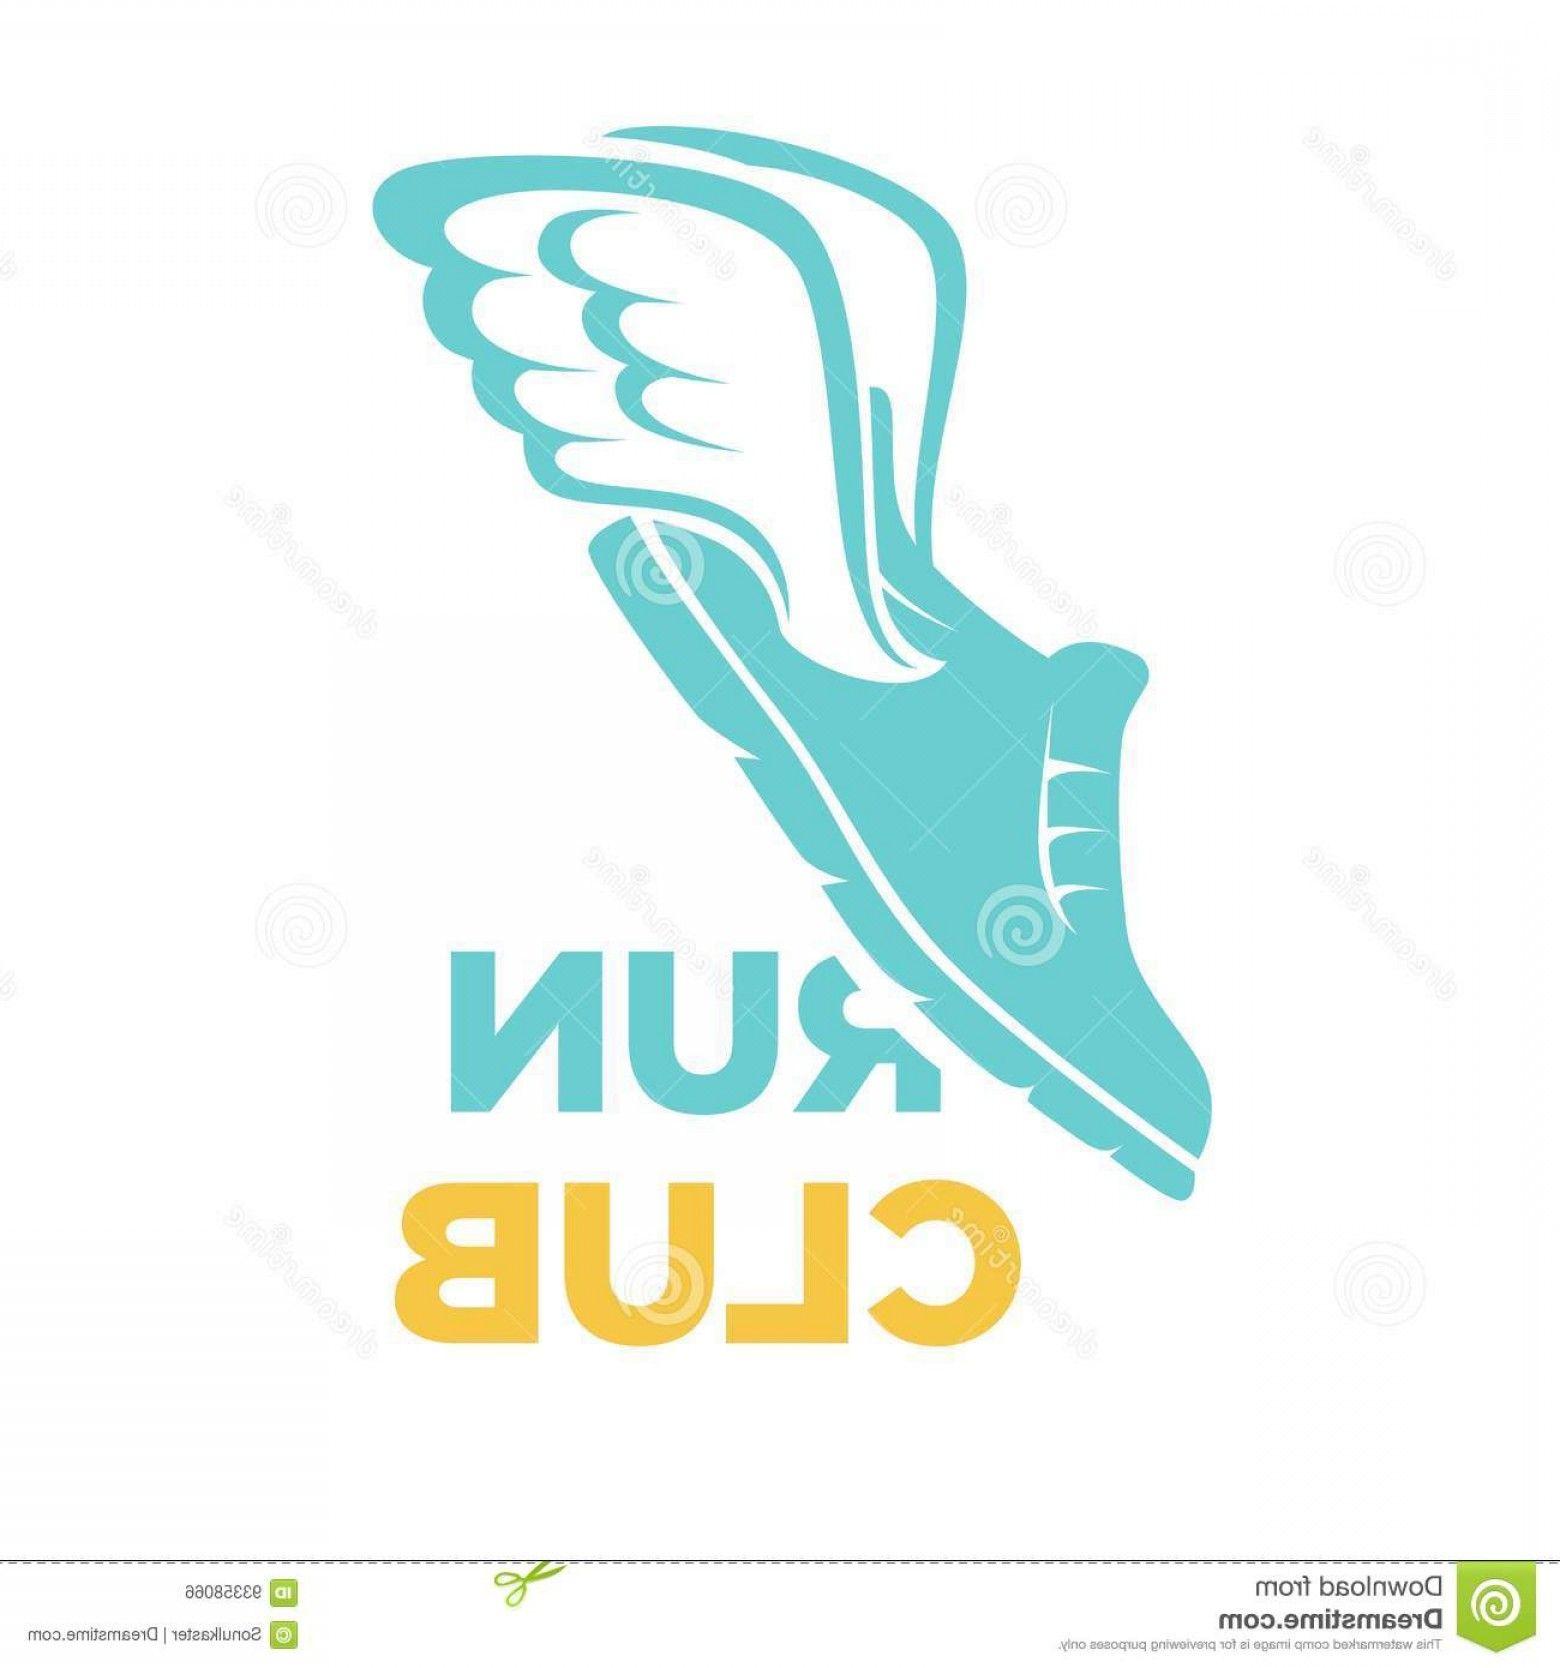 Running Shoe with Wings Logo - Shoe With Wings Vector | sohadacouri